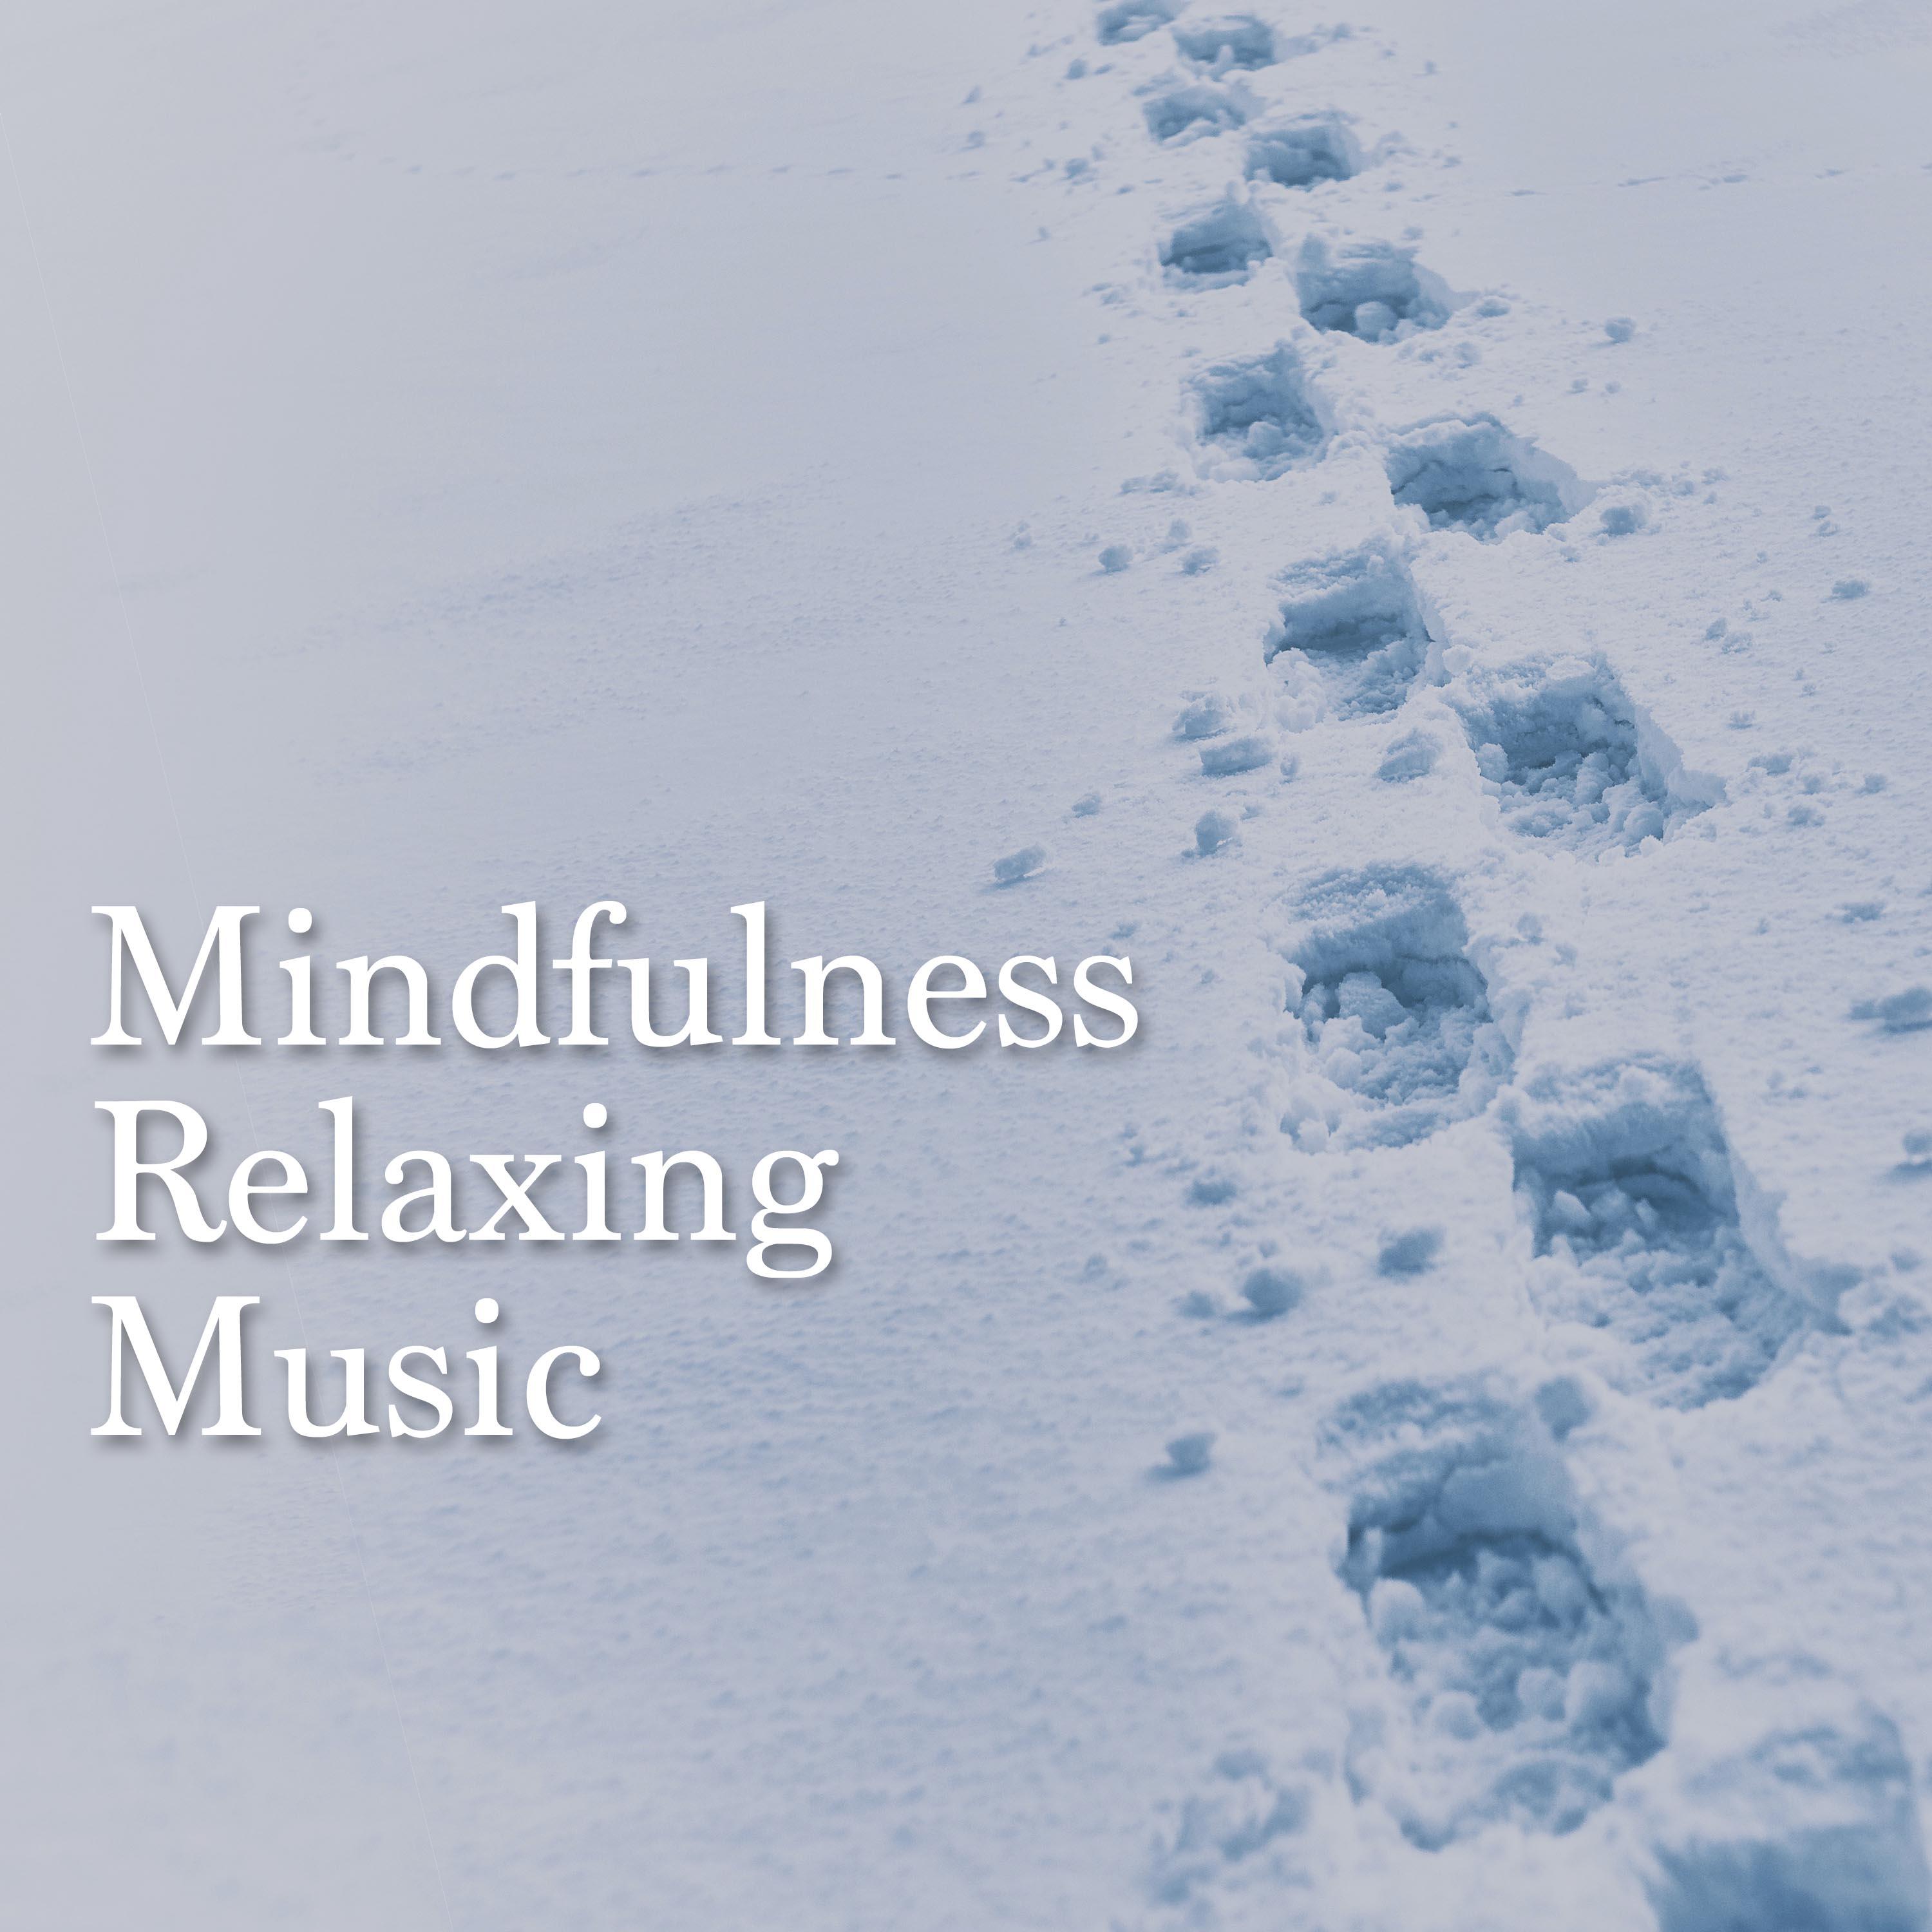 Mindfulness Relaxing Music for Meditation. Soothing Music for Stress Relief, Massage, Sleep